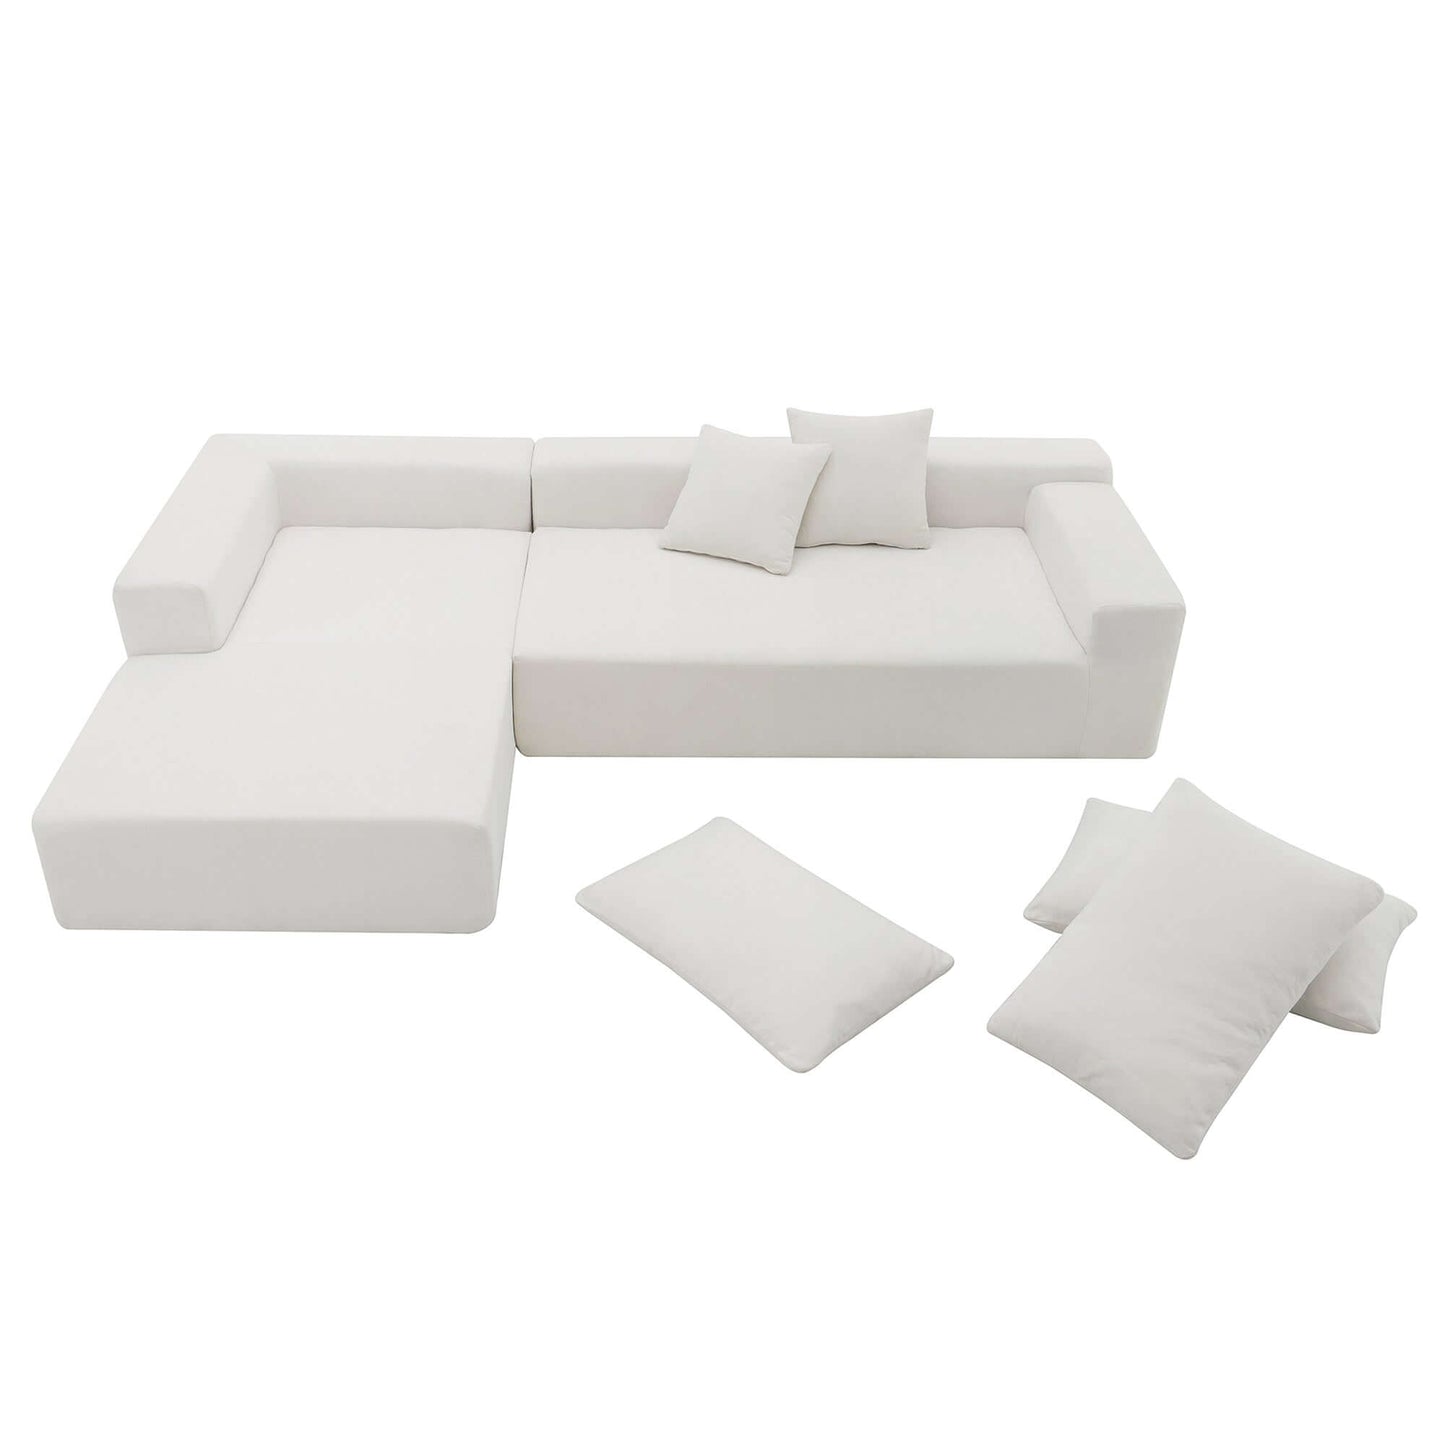 Modern Minimalist Modular Chaise Sectional Sofa Couch, White or Green 109" - Revel Sofa 